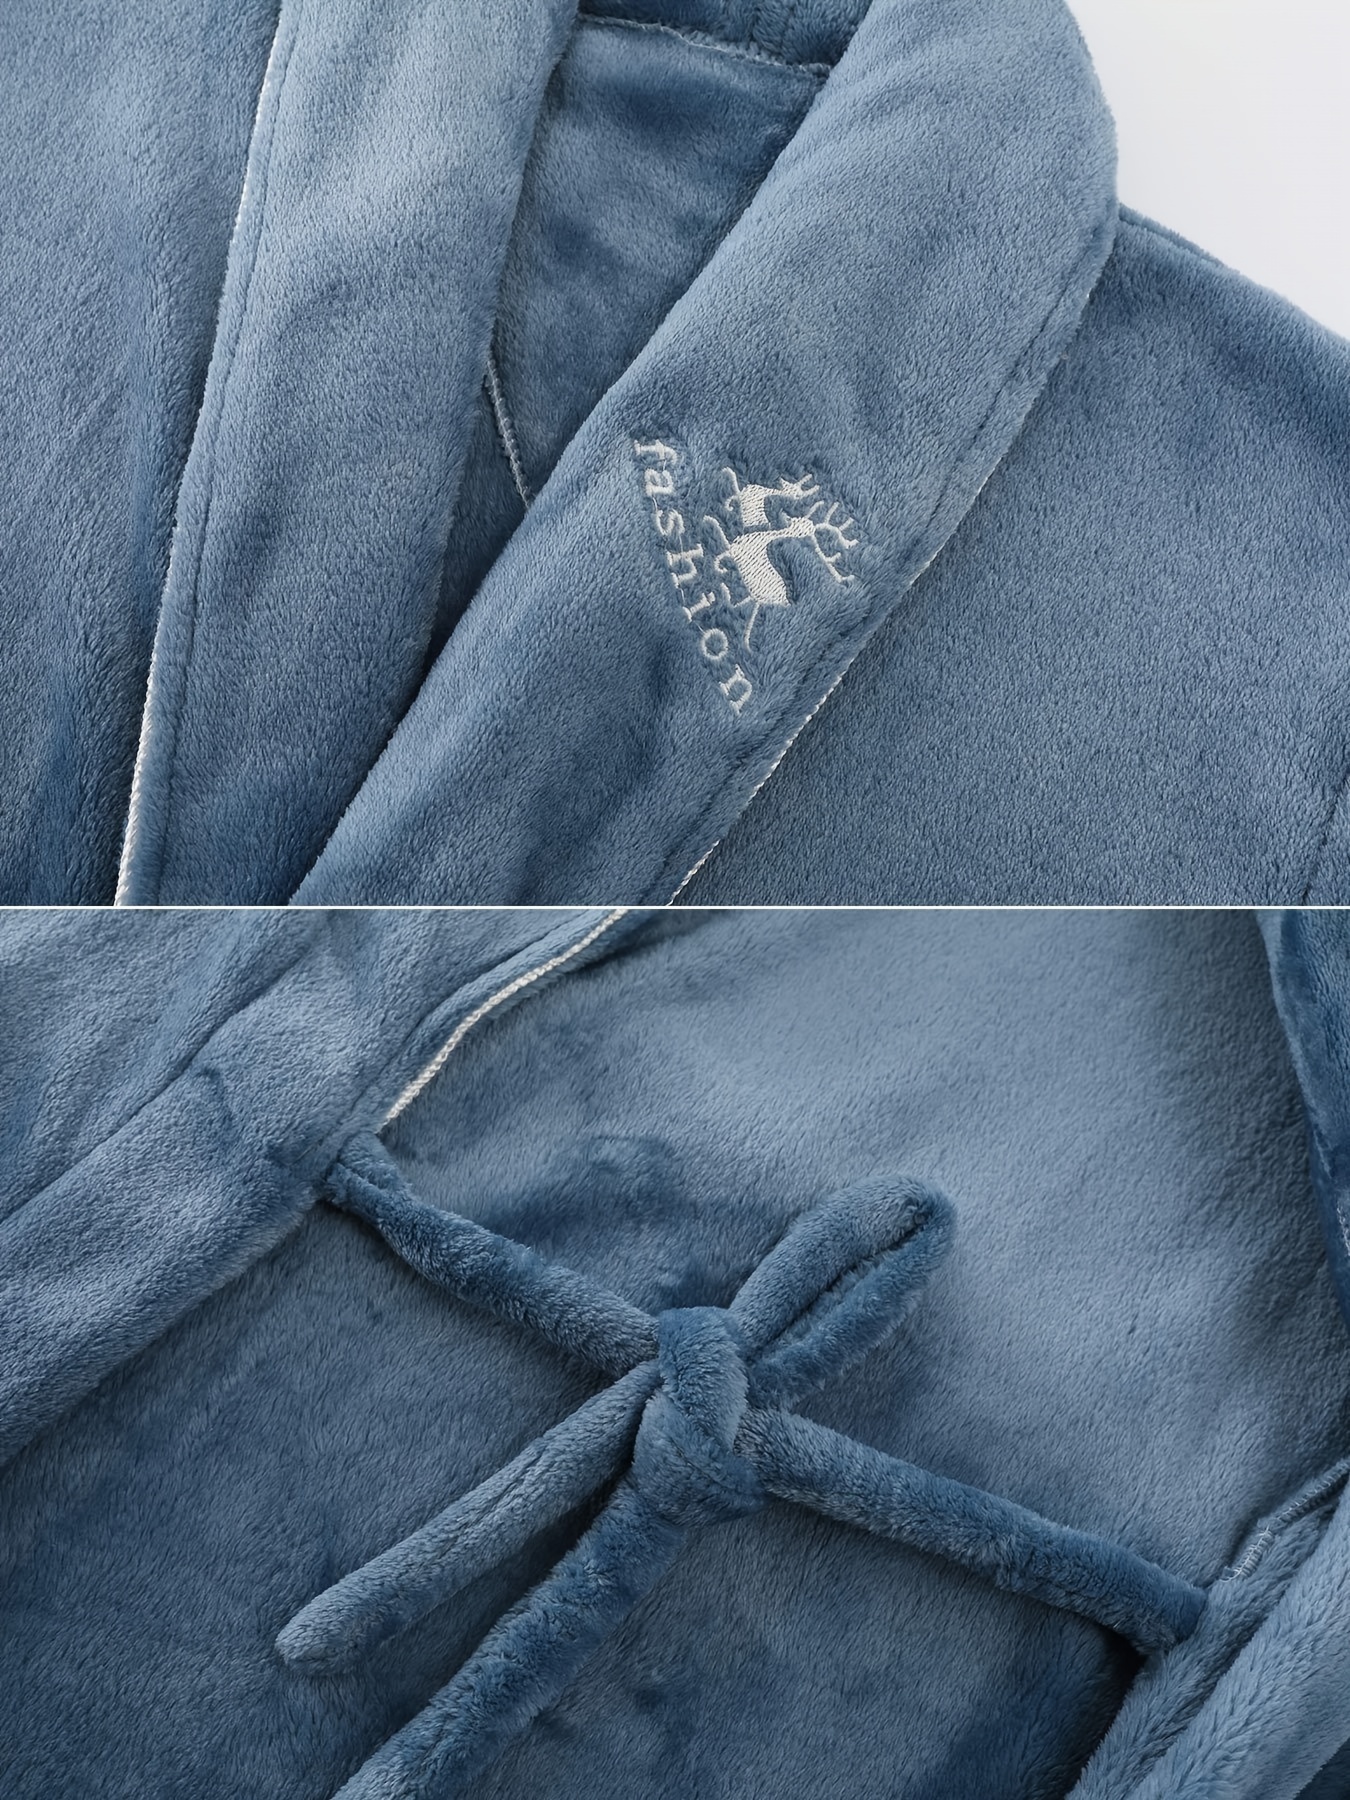 100% Cotton Velour Hooded Bathrobe  Made Exclusively for Orient Express